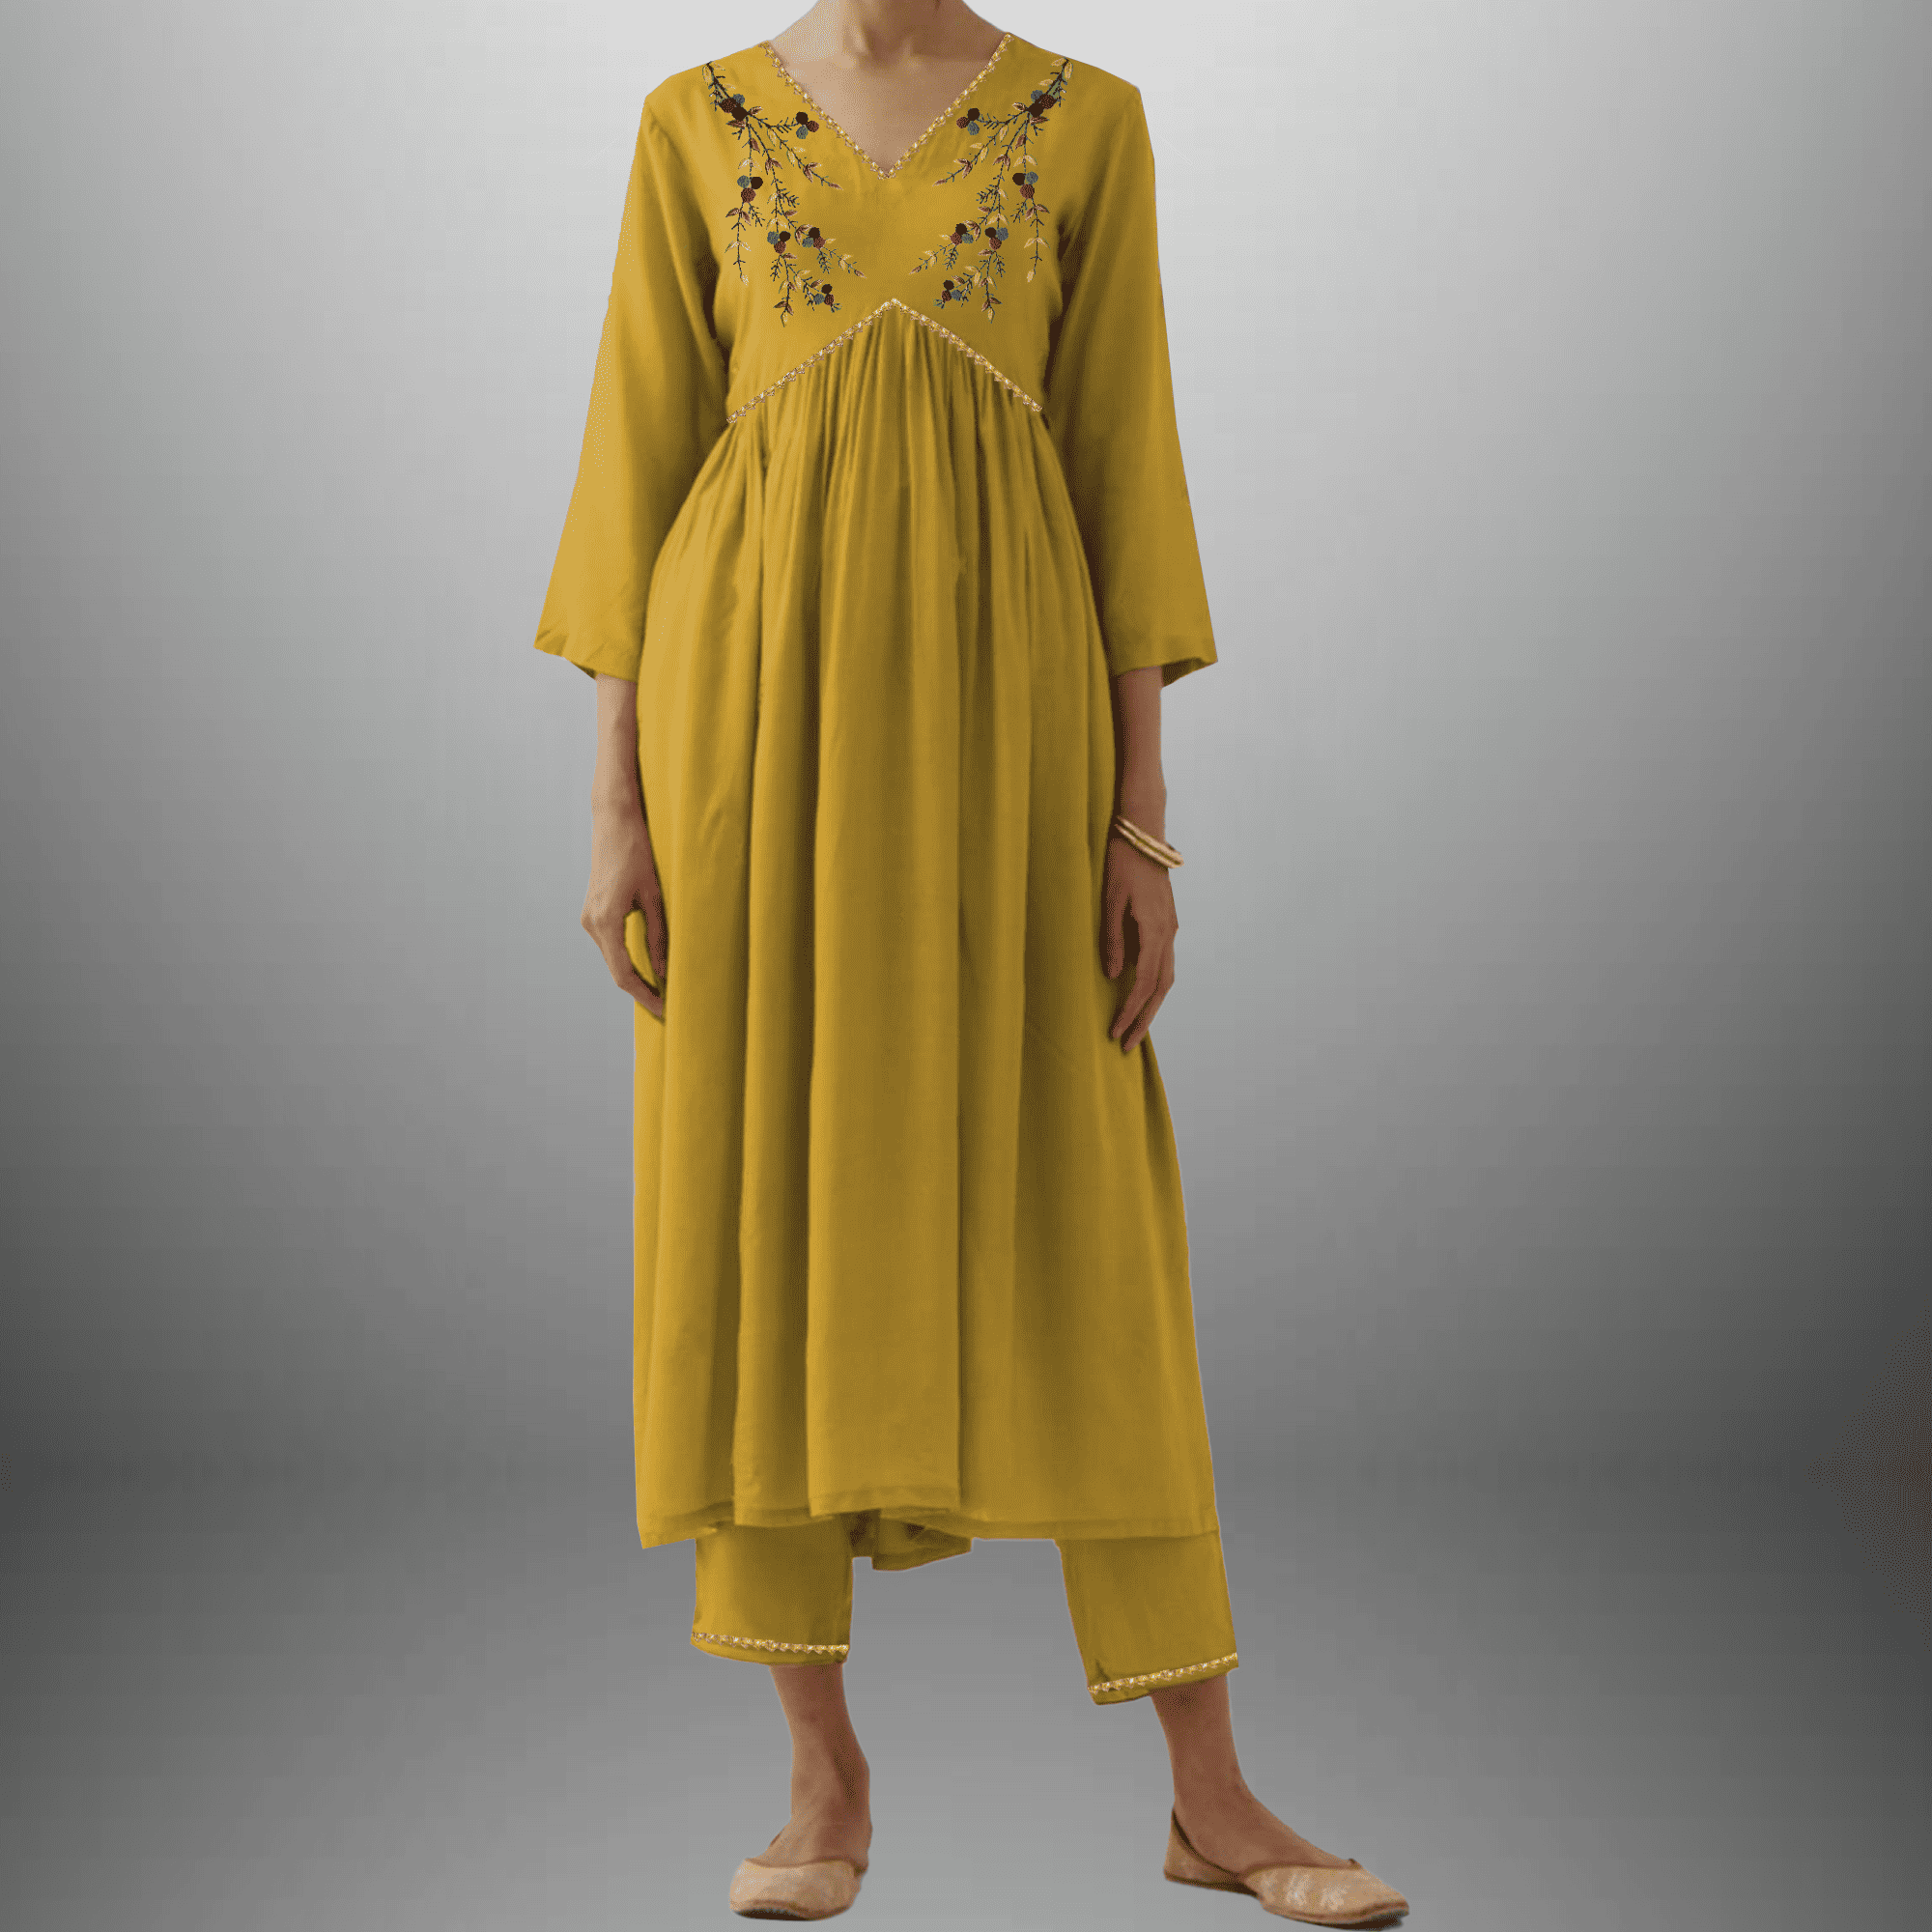 Women's Mustered Yellow Kurti set with Golden lace border and Embroidery on front-RWKS048